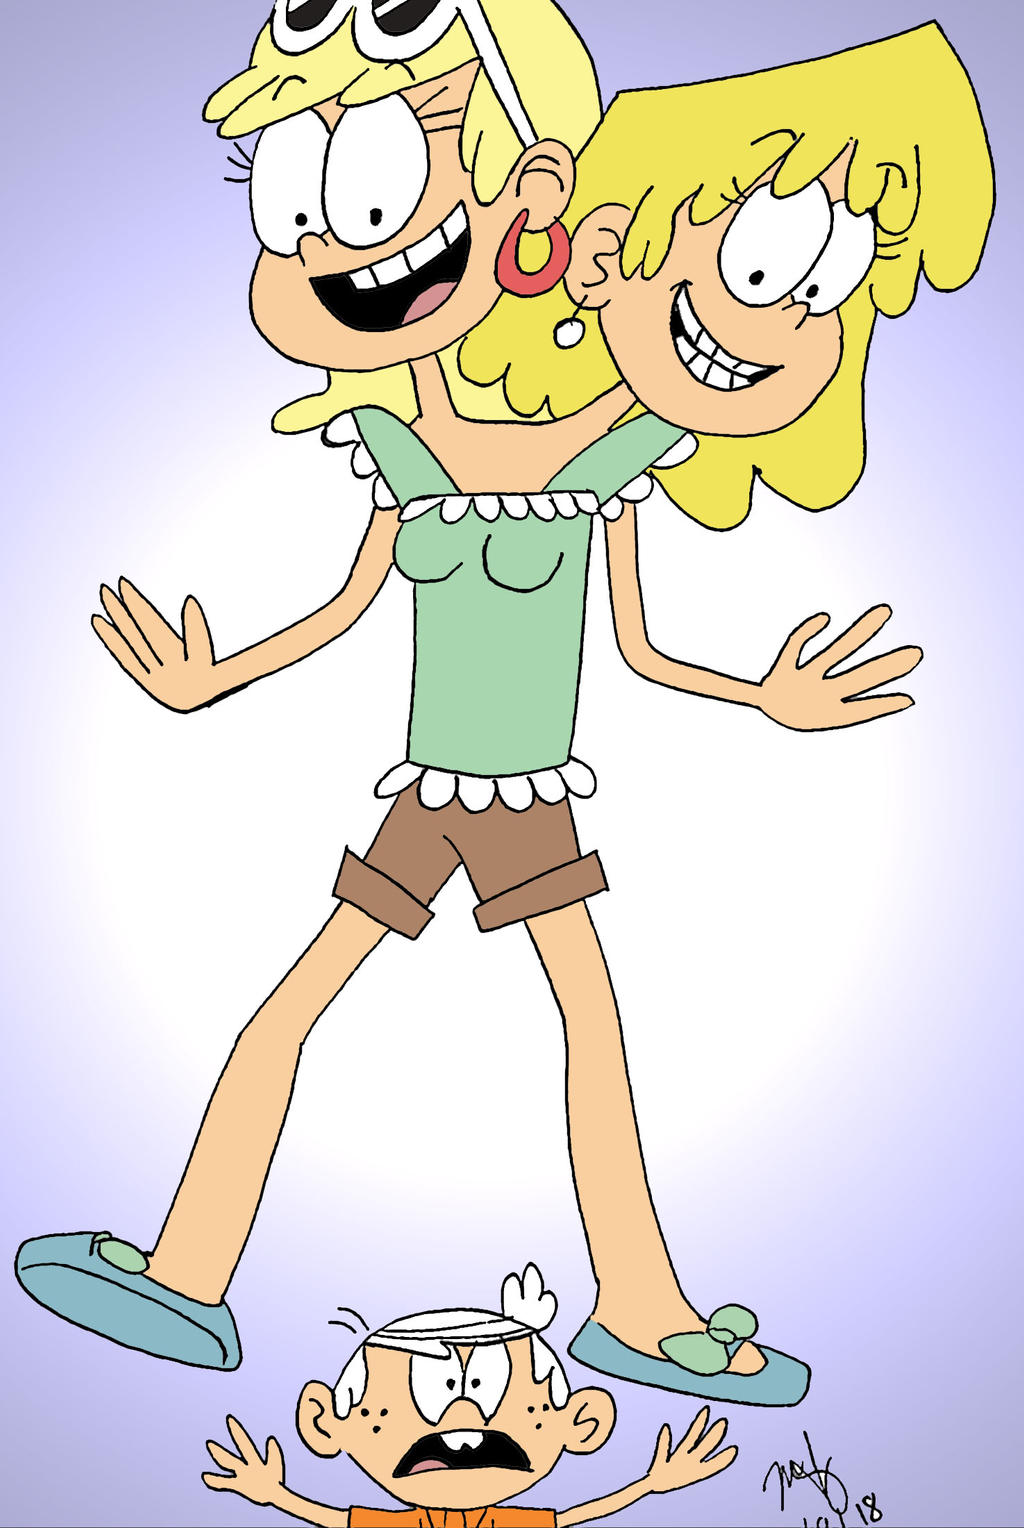 Leni and Lori the Giant by pythonorbit on DeviantArt